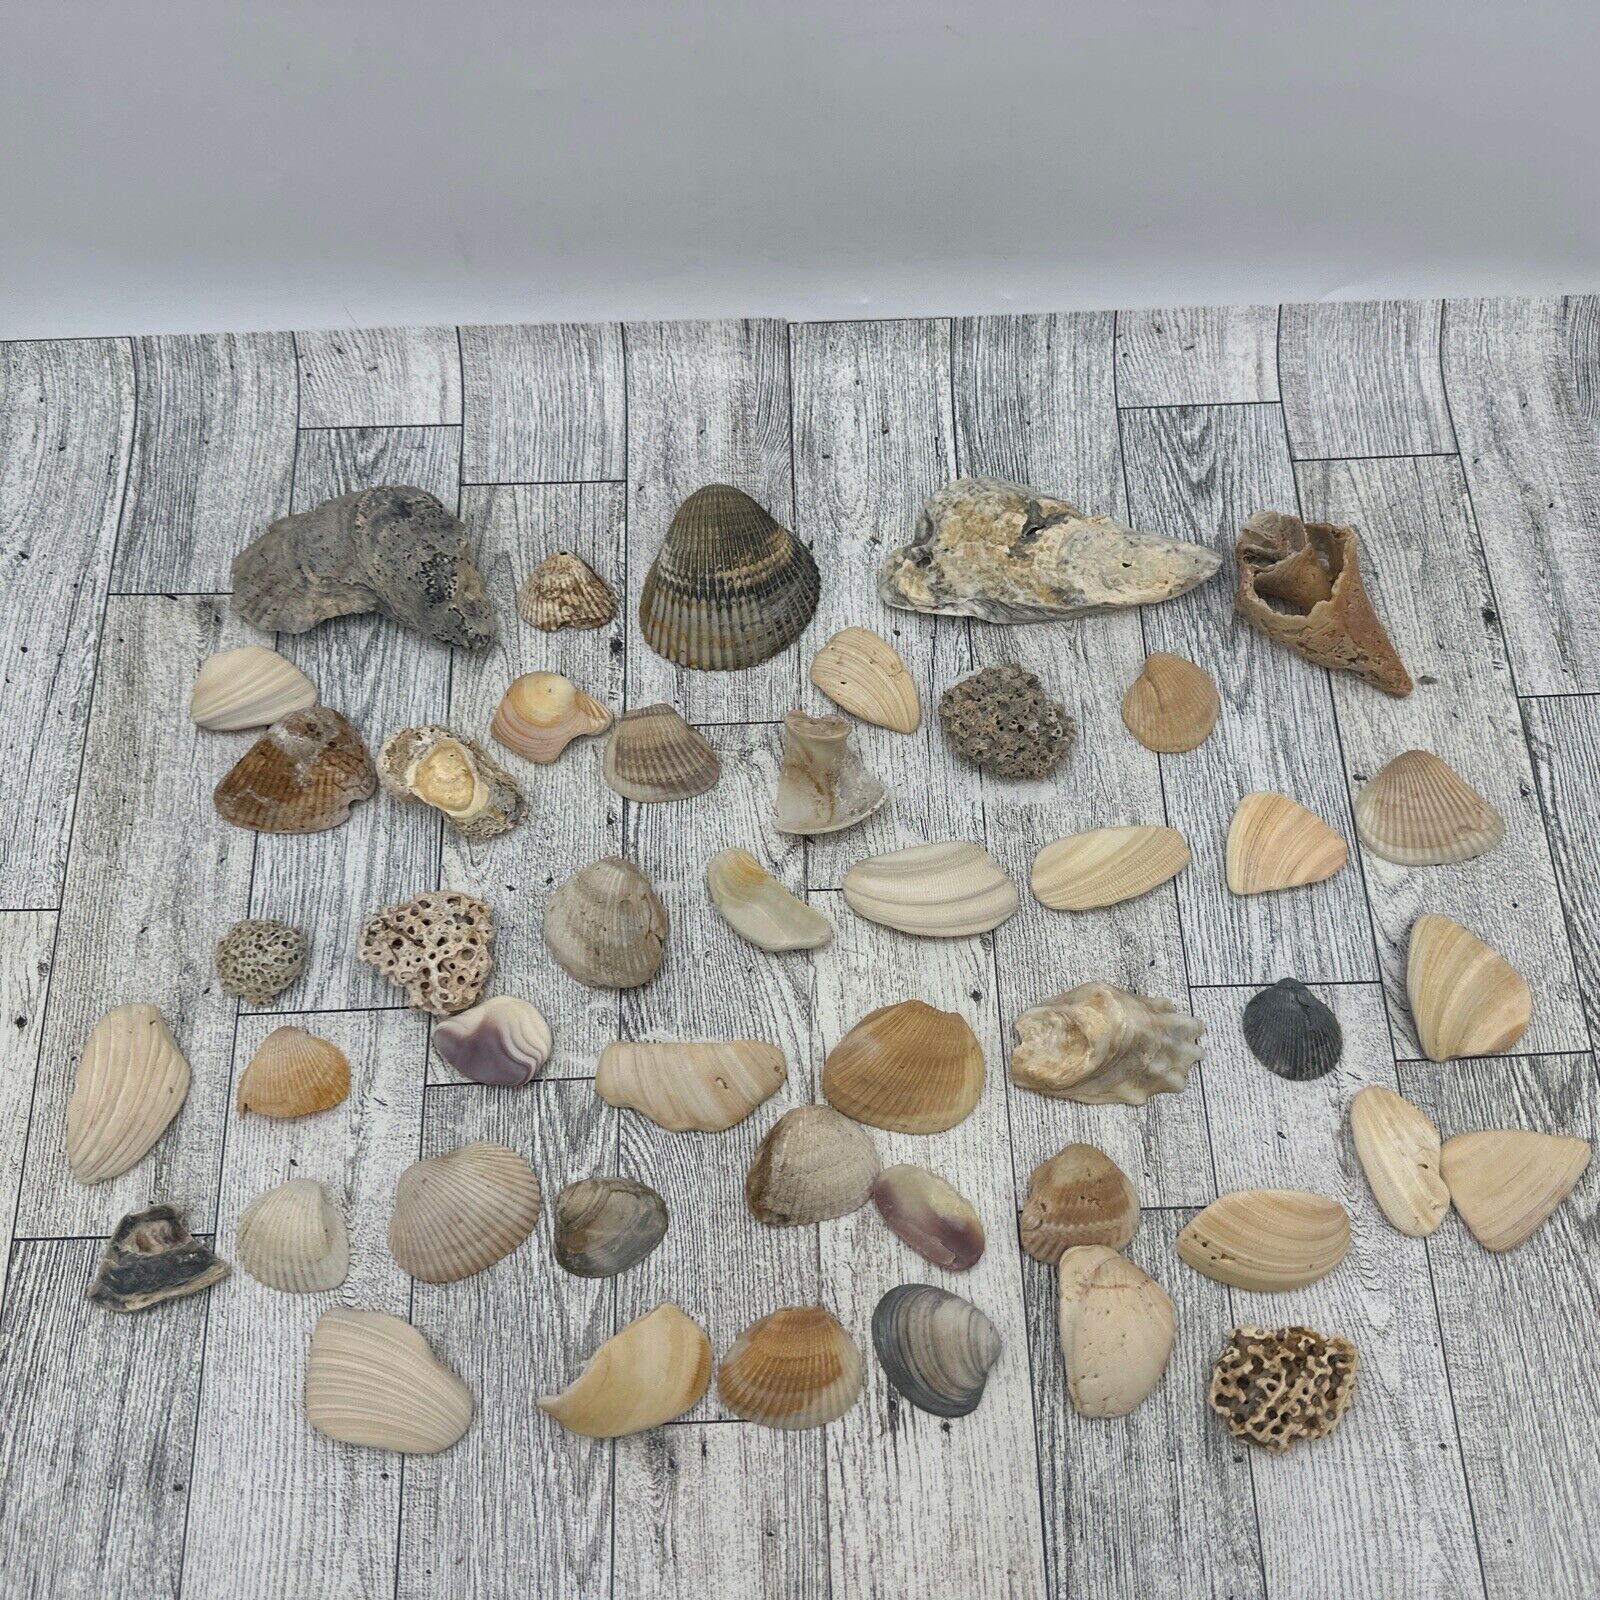 Seashell Lot Collectible Arts and Crafts Large Variety Cockle Clam Medium Small